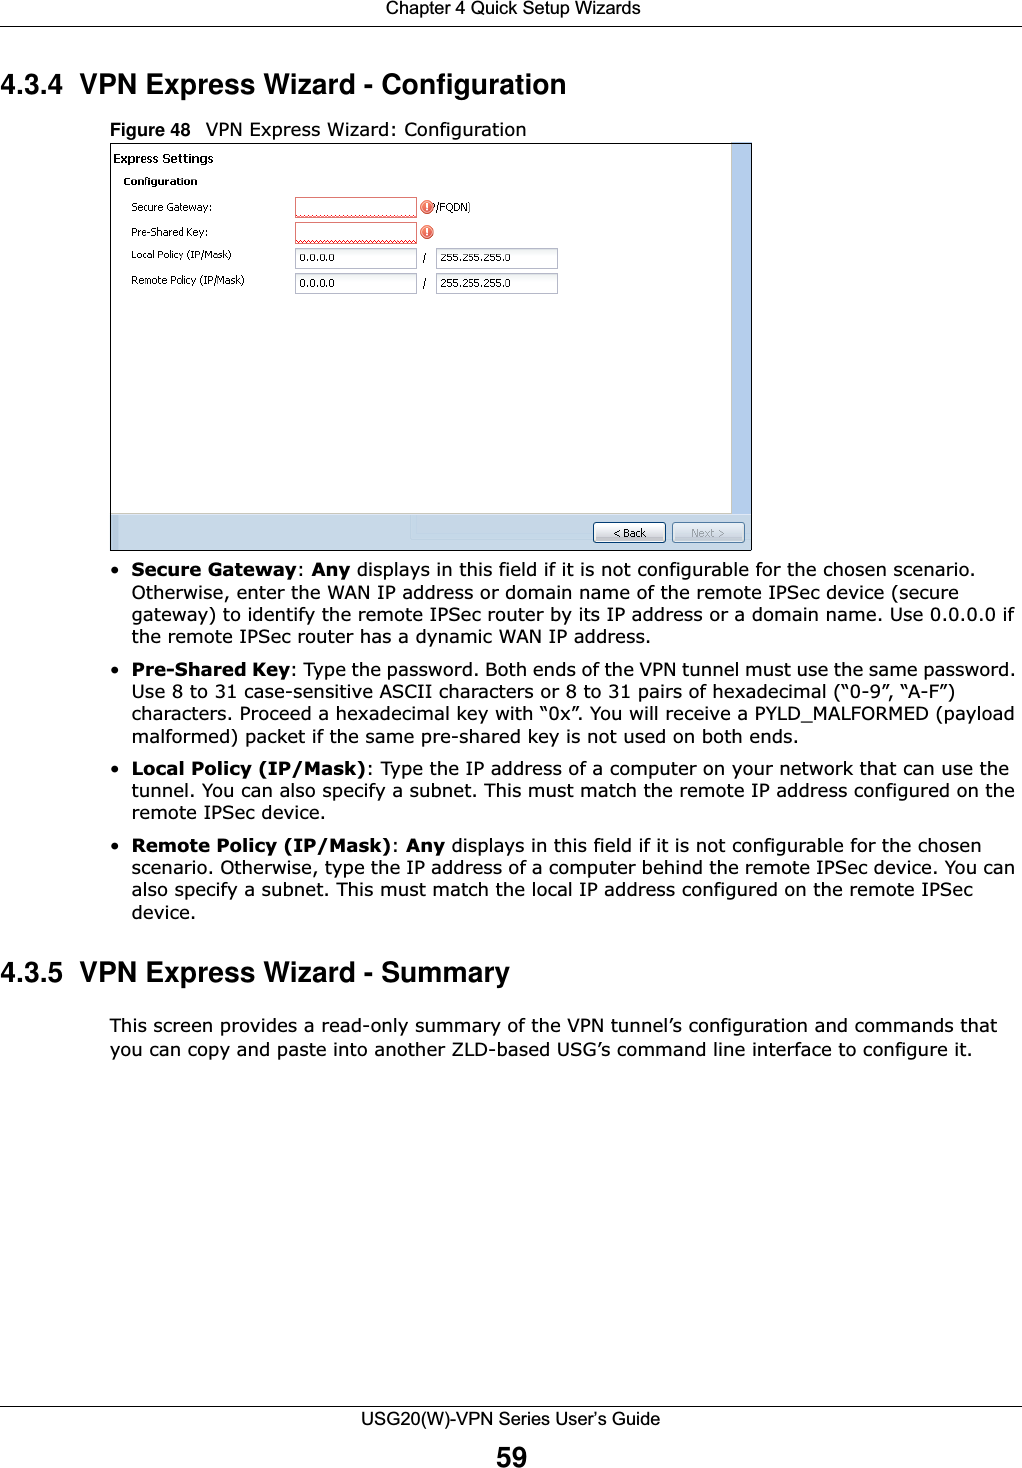  Chapter 4 Quick Setup WizardsUSG20(W)-VPN Series User’s Guide594.3.4  VPN Express Wizard - Configuration Figure 48   VPN Express Wizard: Configuration•Secure Gateway: Any displays in this field if it is not configurable for the chosen scenario. Otherwise, enter the WAN IP address or domain name of the remote IPSec device (secure gateway) to identify the remote IPSec router by its IP address or a domain name. Use 0.0.0.0 if the remote IPSec router has a dynamic WAN IP address.•Pre-Shared Key: Type the password. Both ends of the VPN tunnel must use the same password. Use 8 to 31 case-sensitive ASCII characters or 8 to 31 pairs of hexadecimal (“0-9”, “A-F”) characters. Proceed a hexadecimal key with “0x”. You will receive a PYLD_MALFORMED (payload malformed) packet if the same pre-shared key is not used on both ends.•Local Policy (IP/Mask): Type the IP address of a computer on your network that can use the tunnel. You can also specify a subnet. This must match the remote IP address configured on the remote IPSec device. •Remote Policy (IP/Mask): Any displays in this field if it is not configurable for the chosen scenario. Otherwise, type the IP address of a computer behind the remote IPSec device. You can also specify a subnet. This must match the local IP address configured on the remote IPSec device.4.3.5  VPN Express Wizard - Summary This screen provides a read-only summary of the VPN tunnel’s configuration and commands that you can copy and paste into another ZLD-based USG’s command line interface to configure it.